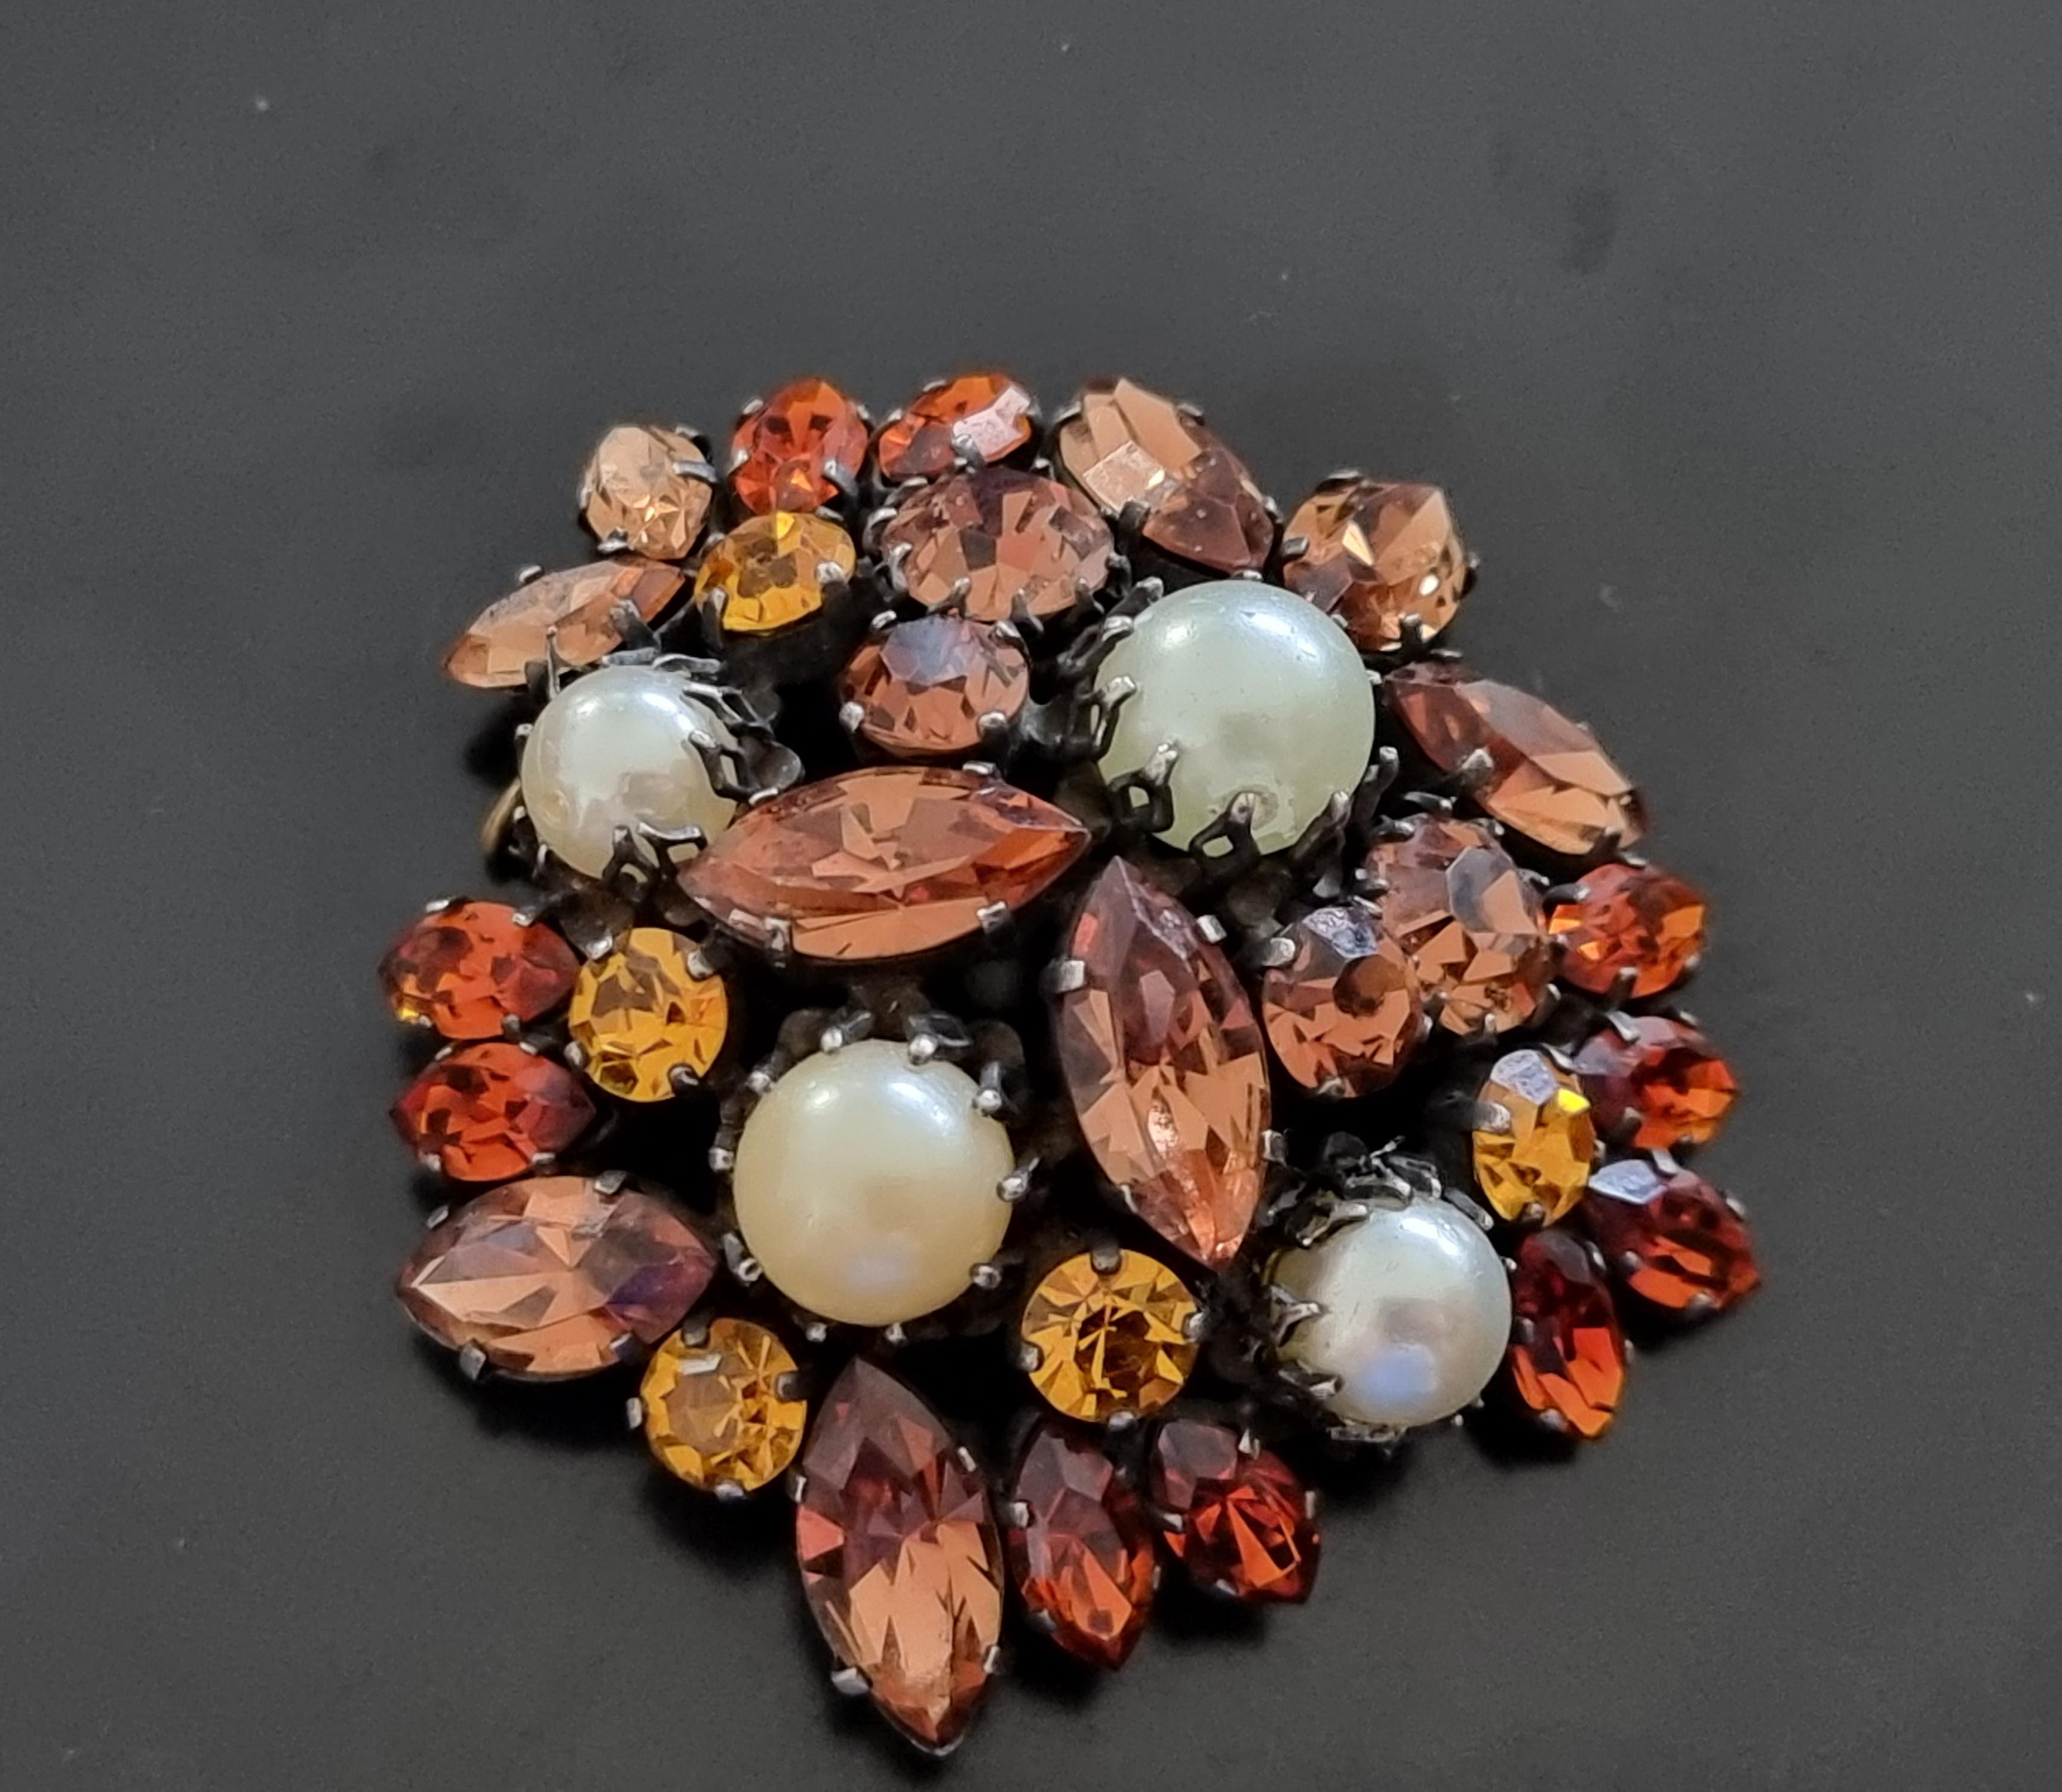 Magnificent old BROOCH,
vintage 50's,
in blackened metal, glass rhinestones, pearls,
by Haute Couture designer ROGER Jean Pierre,
dimensions 5.5 x 5.5 cm, weight 24 g,
good condition.

The jeweler and designer, famous French parurier ROGER Jean